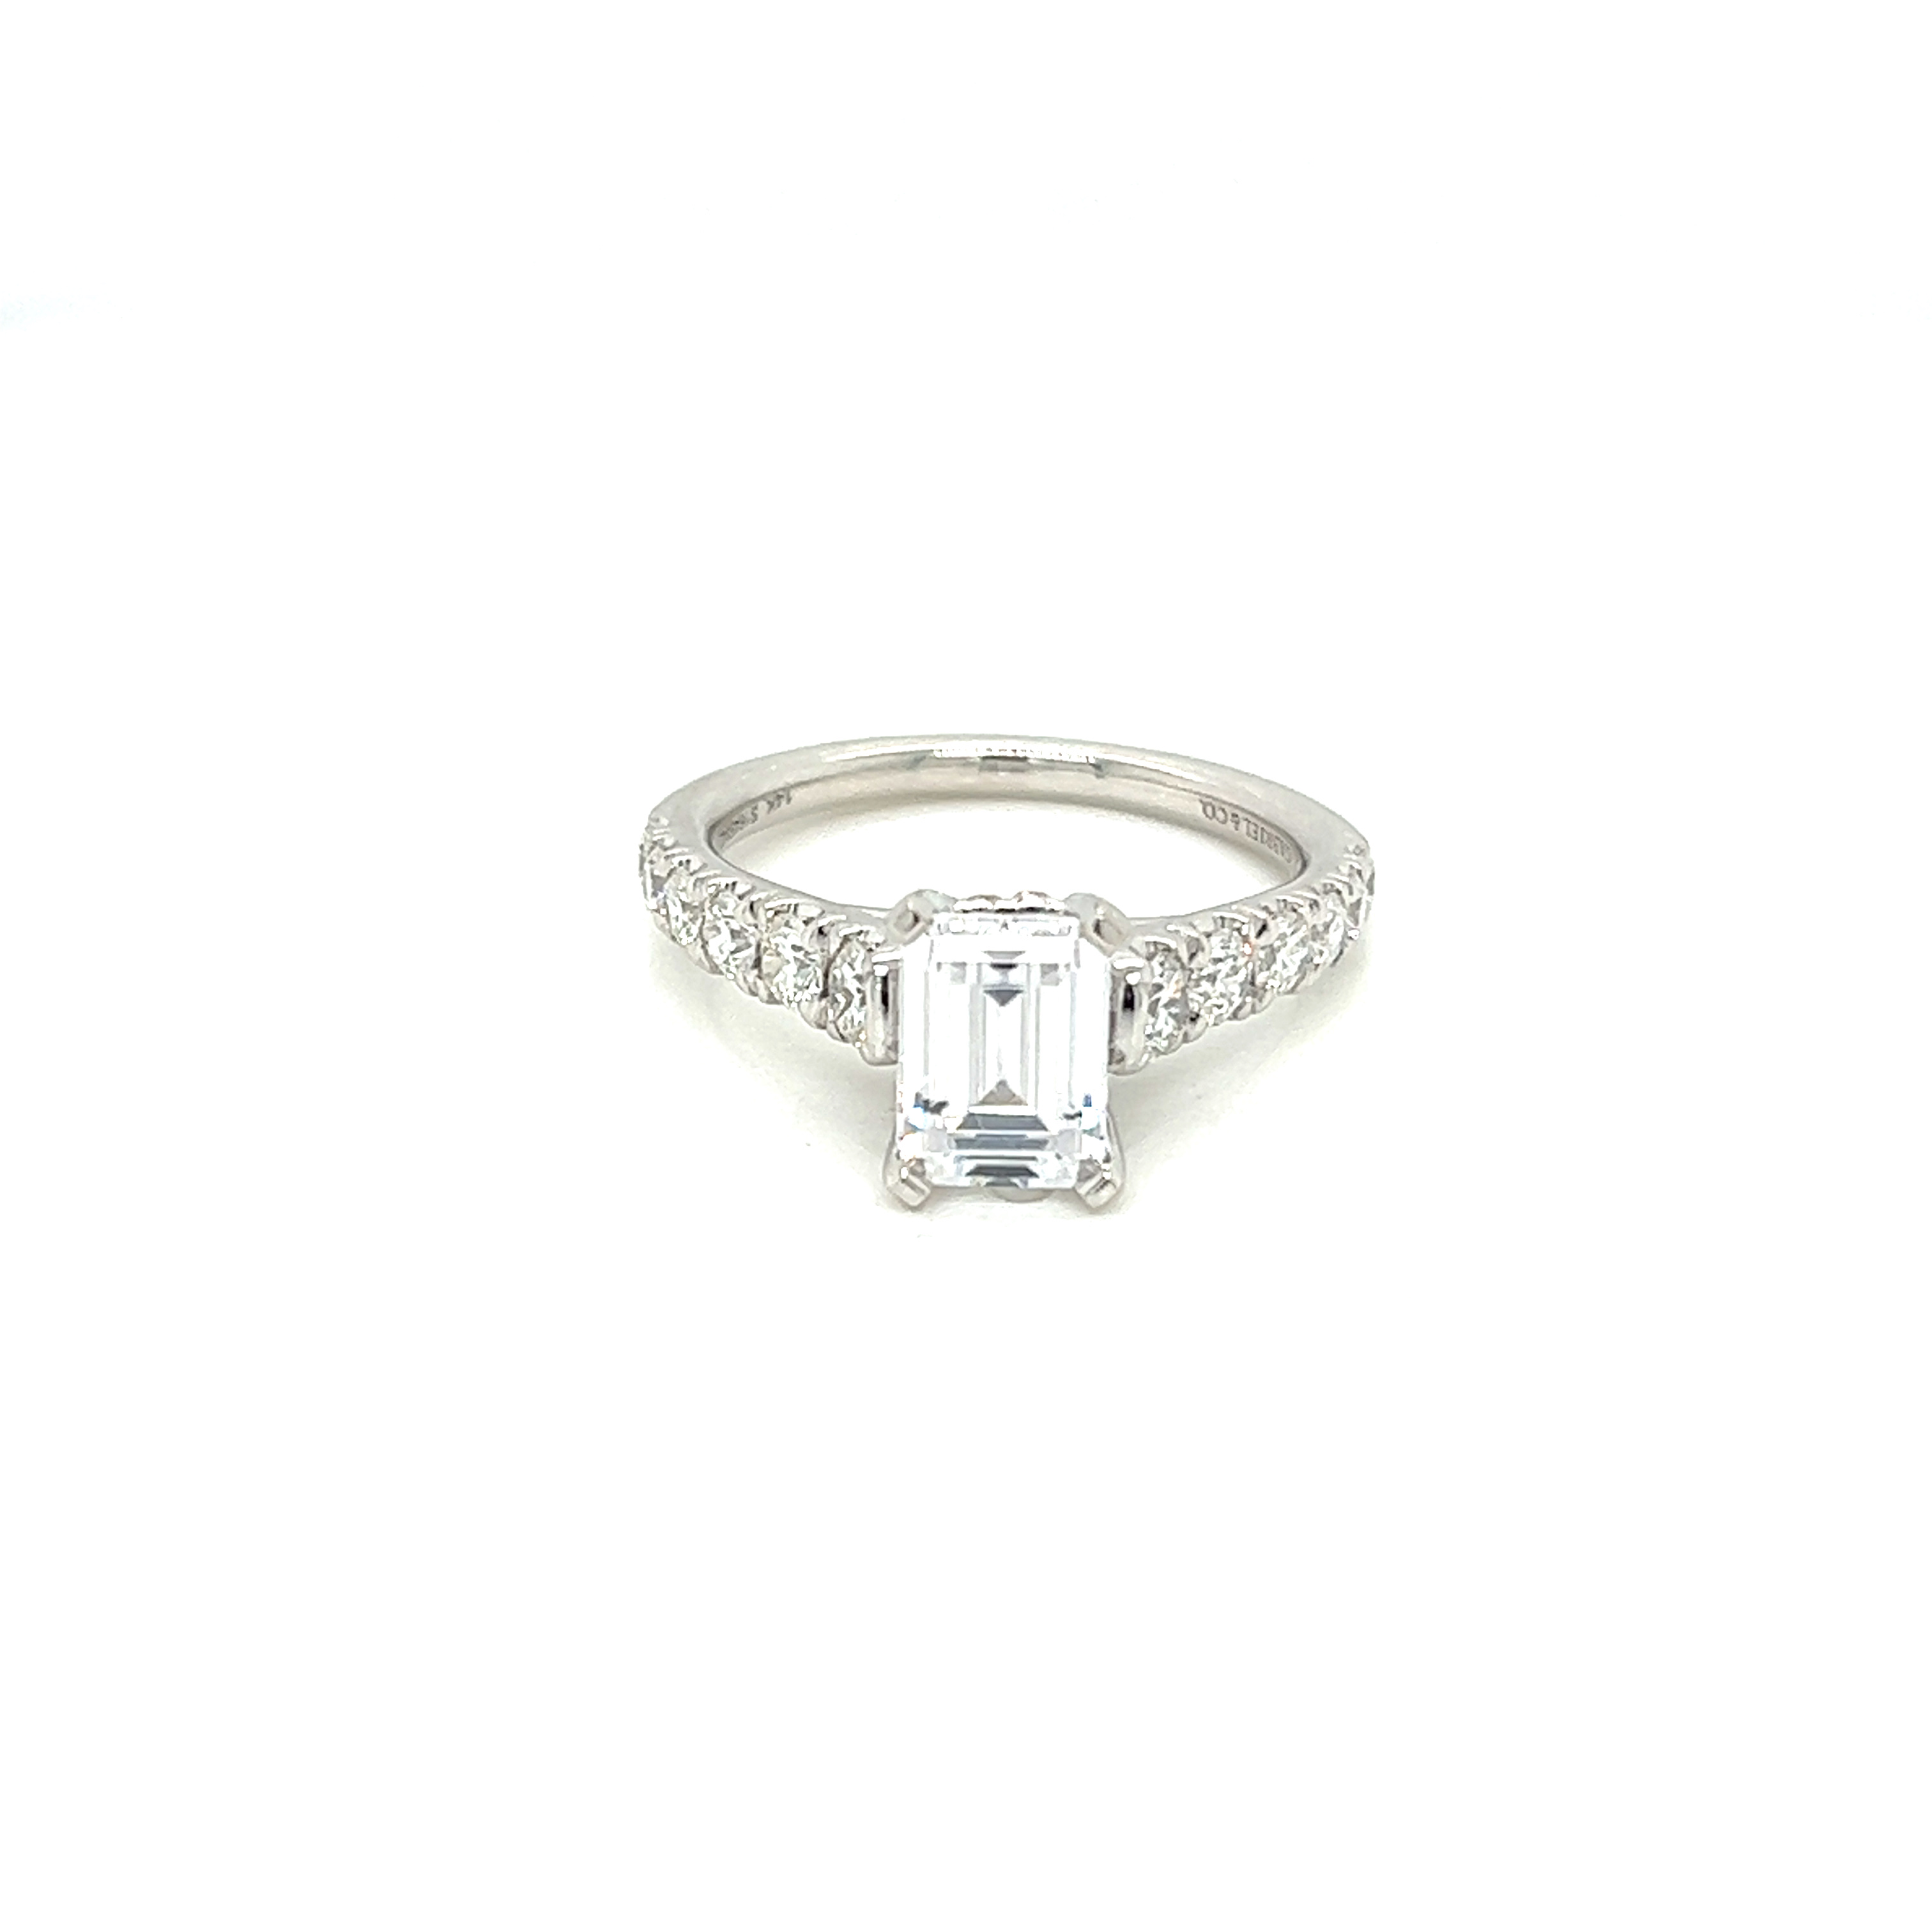 14 Karat white gold semi mount engagement ring Size 6.5 with 12=0.78 total weight round brilliant G VS Diamonds